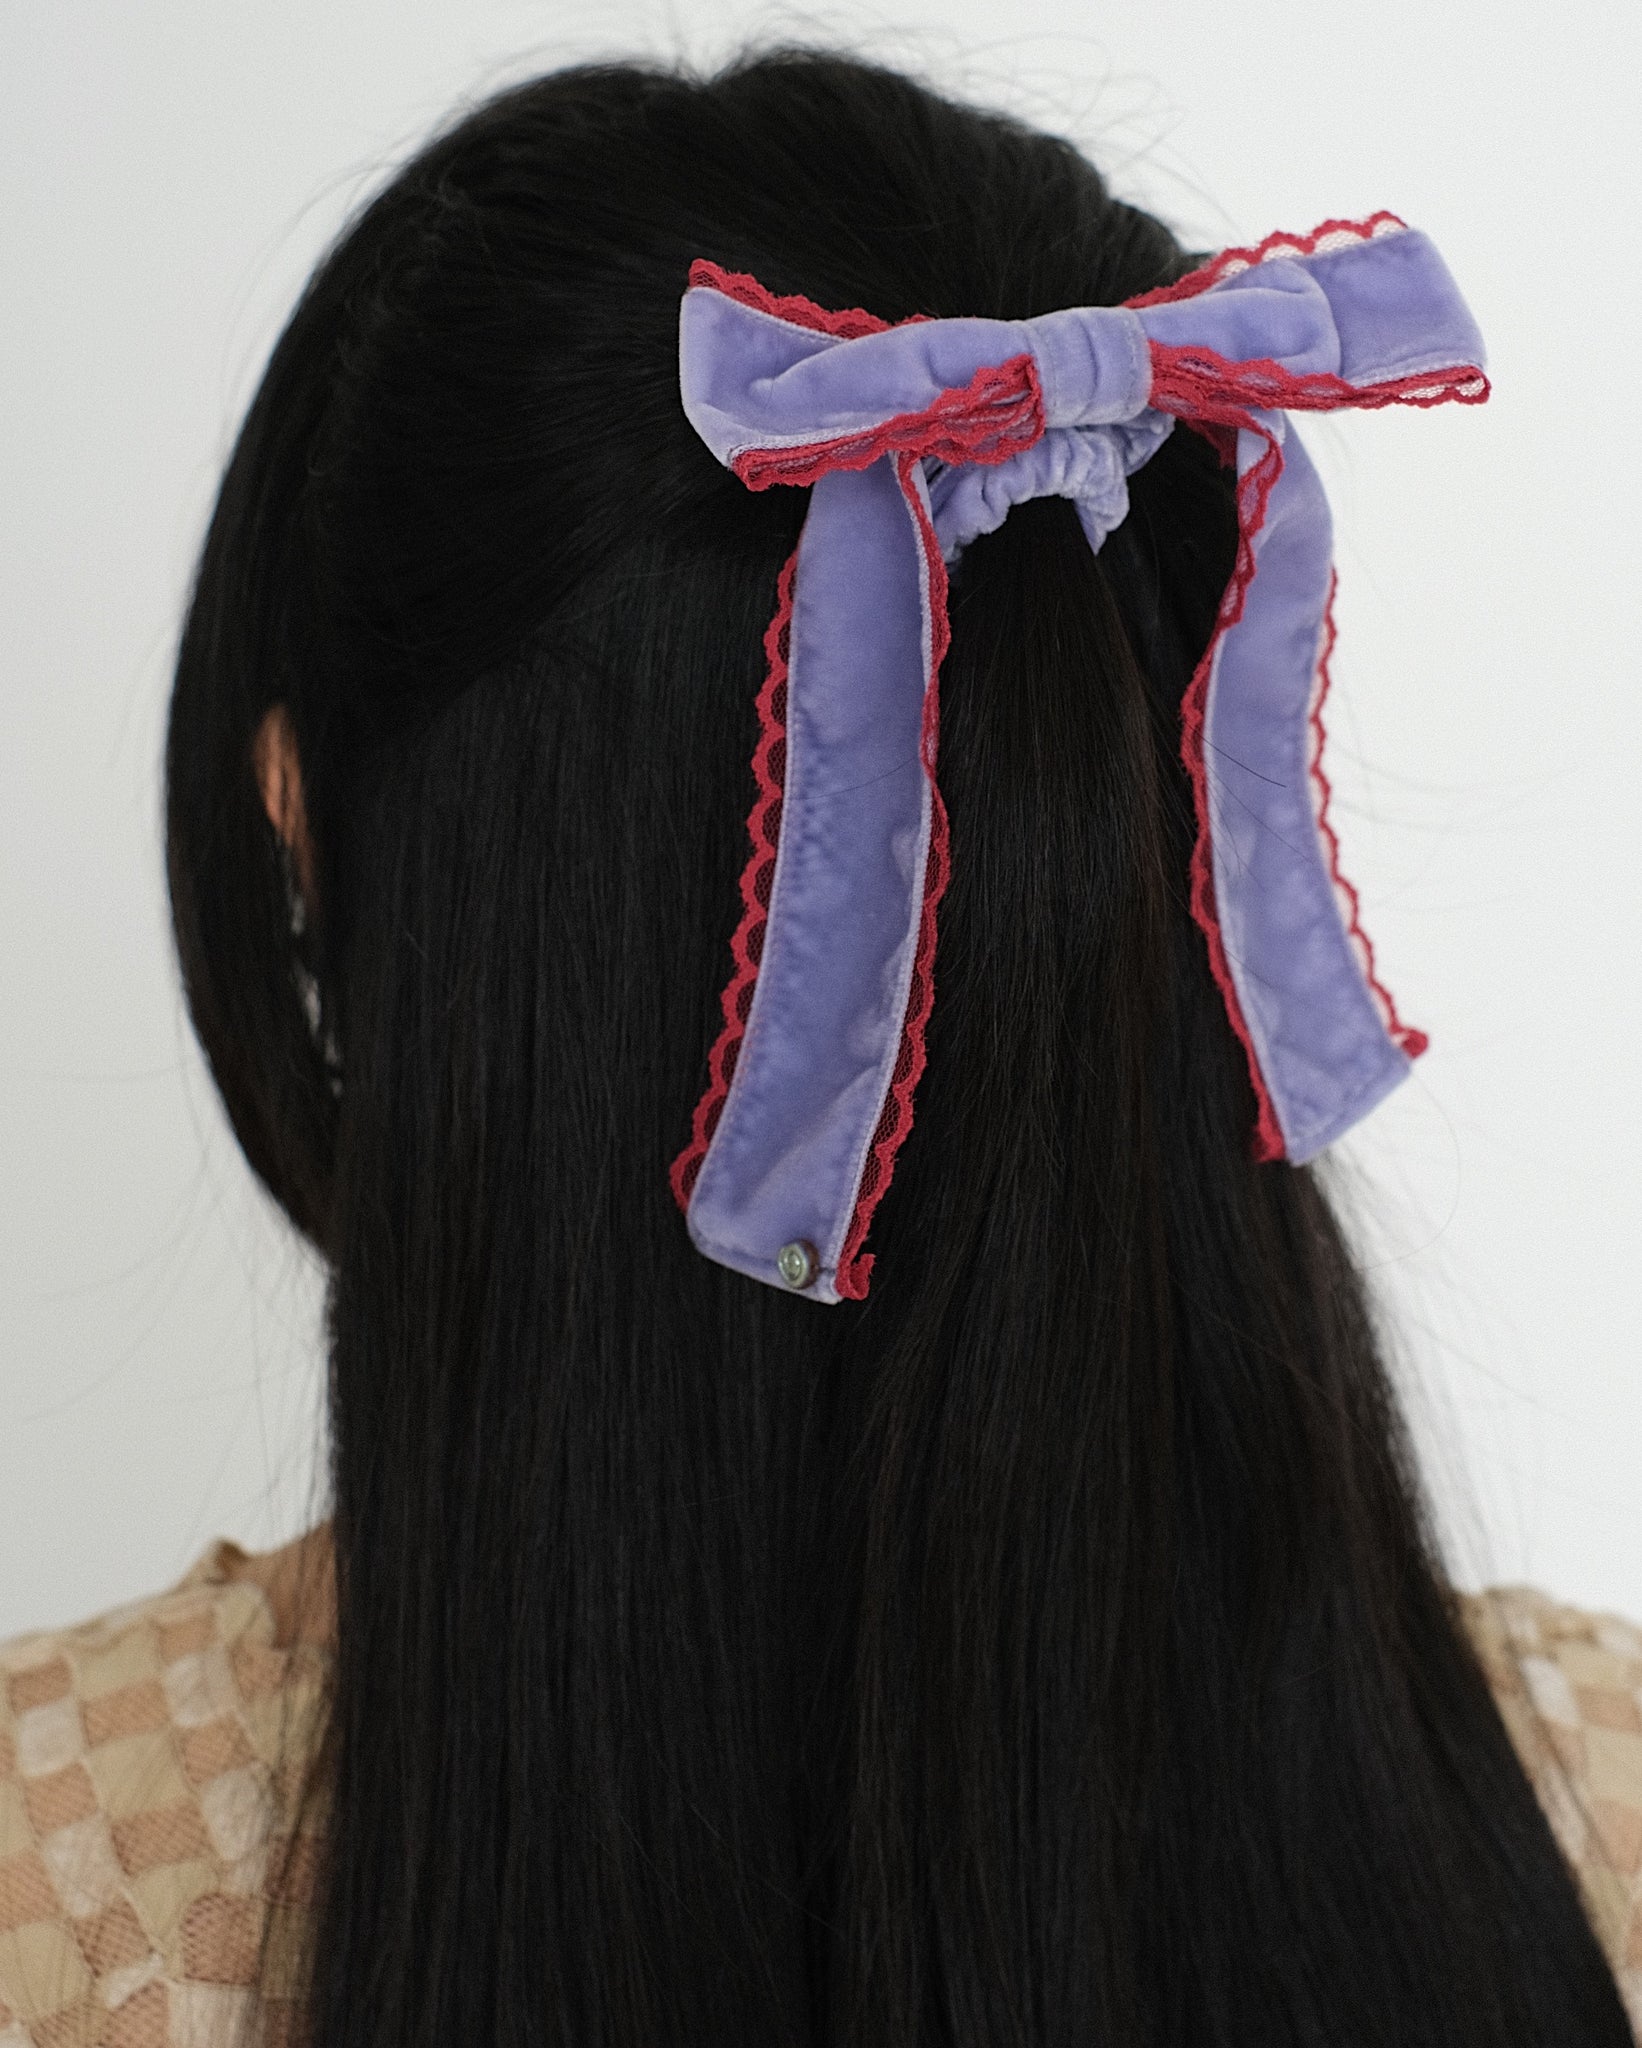 Merrma Velvet Bow Scrunchie in Purple with Red Lace Trim